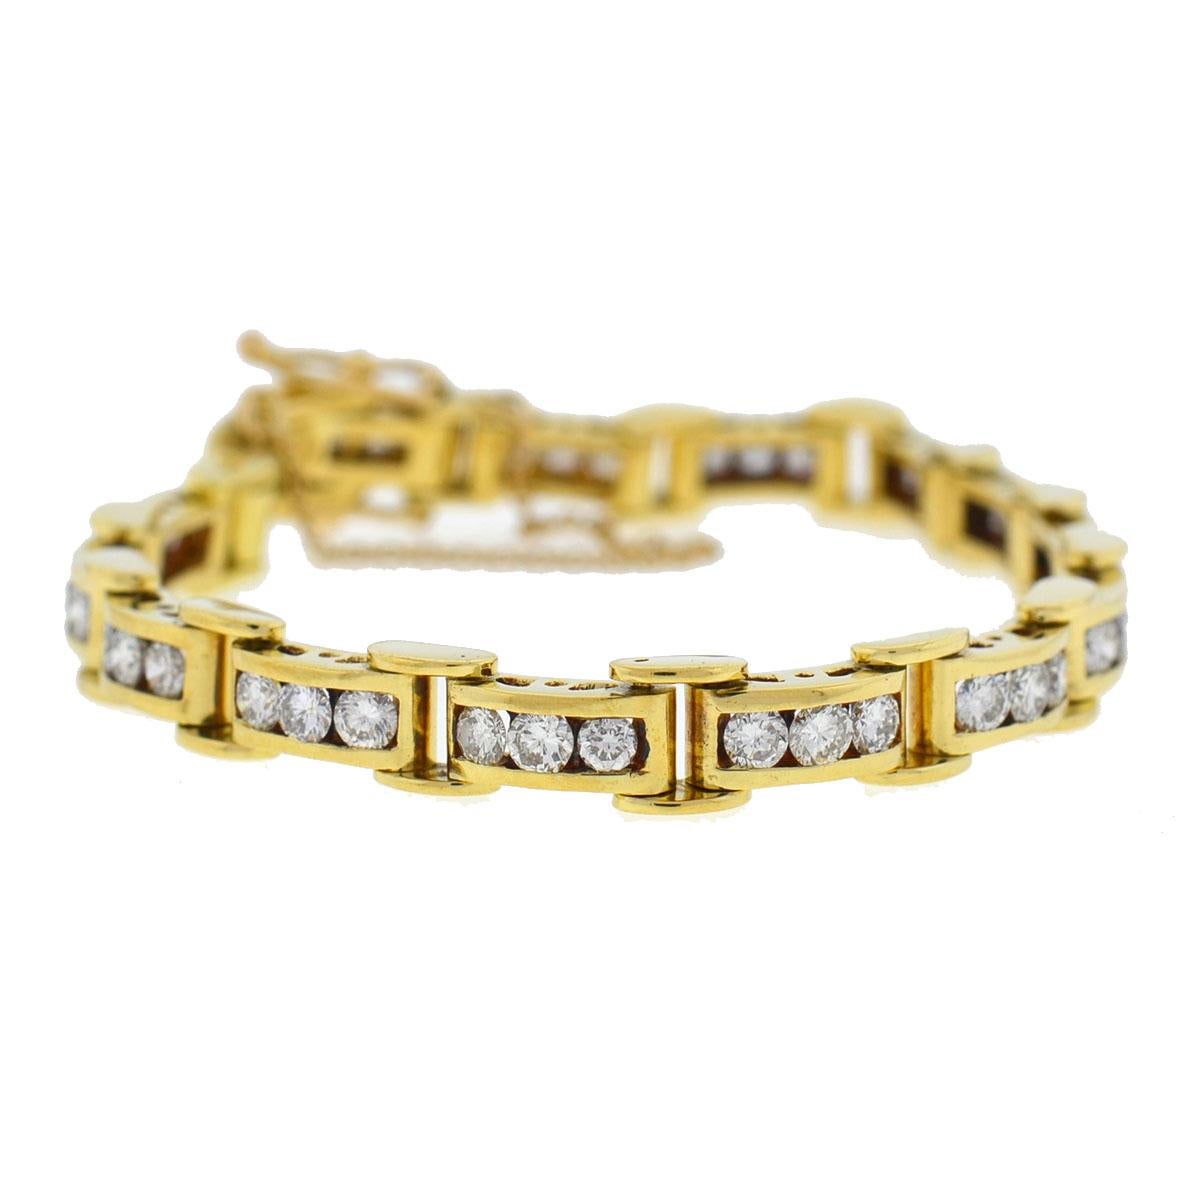 Company-N/A
Style-Diamond Channel Set Bracelet
Metal-18k Yellow Gold
Stones-Diamonds Approx. 4.50 ctw
Weight-34.57 Grams
Length-Fits 7.25